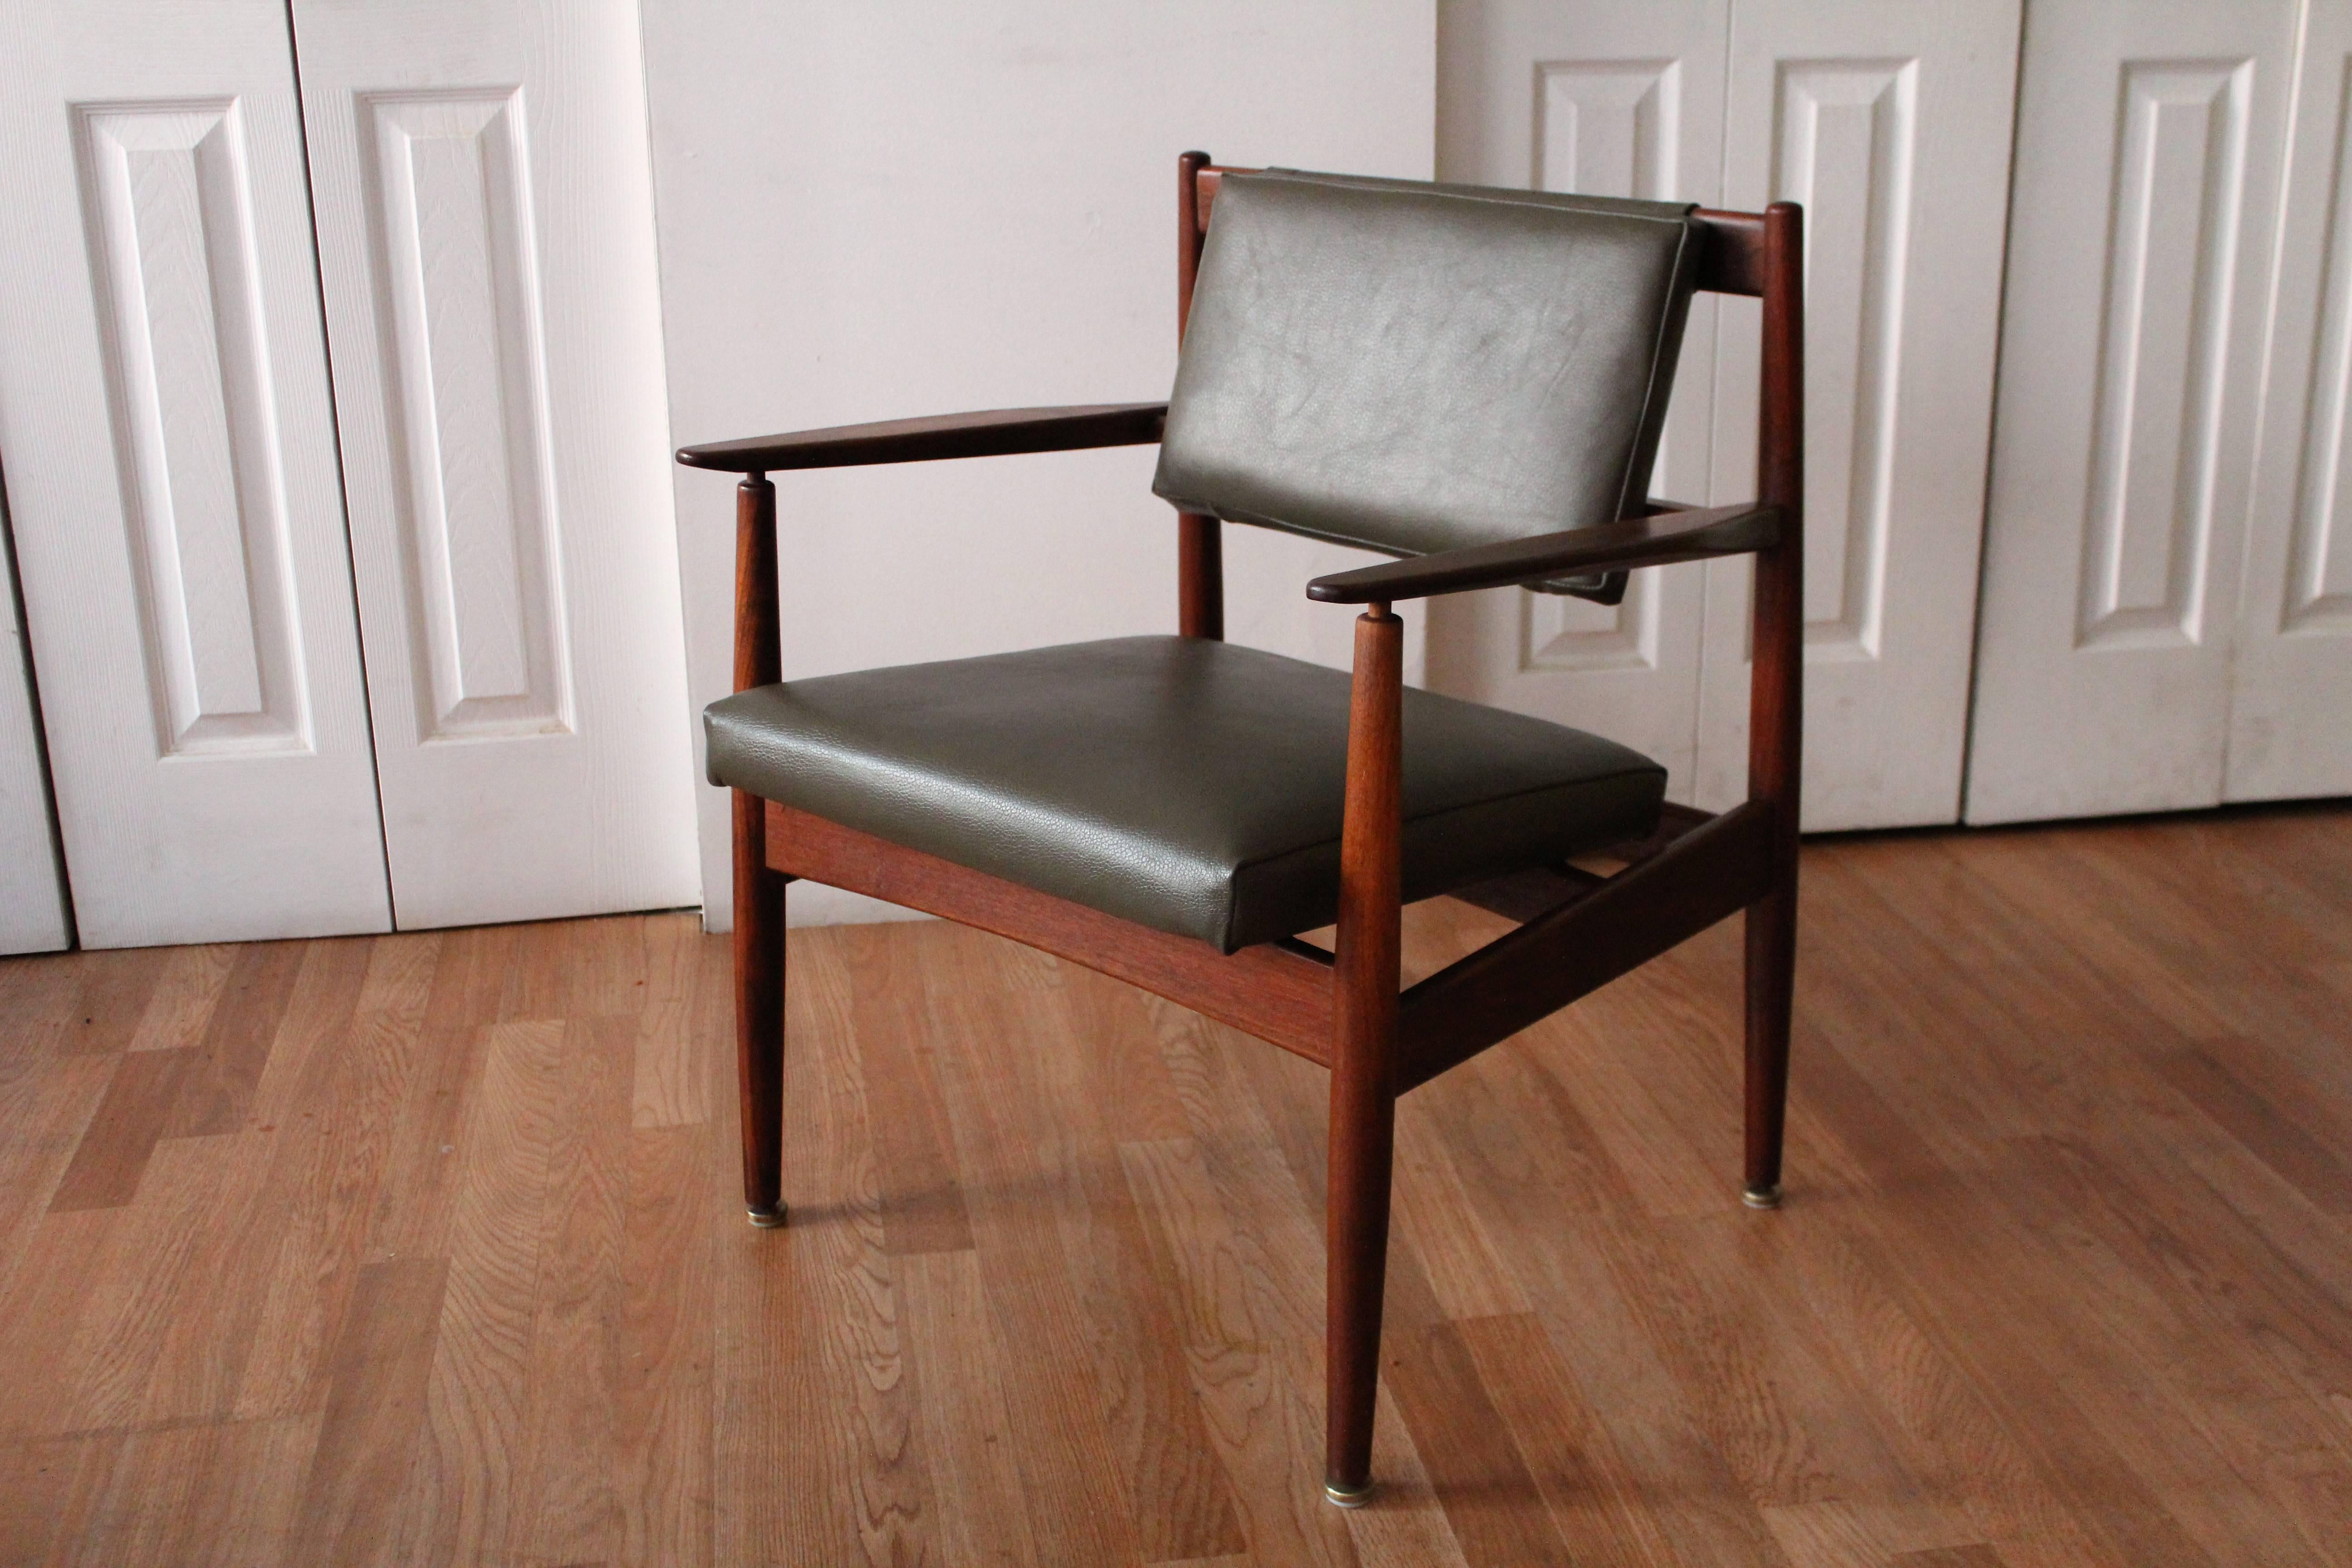 Jens Risom walnut armchair design #C160, newly upholstered in army green spinneybeck leather. Rare.